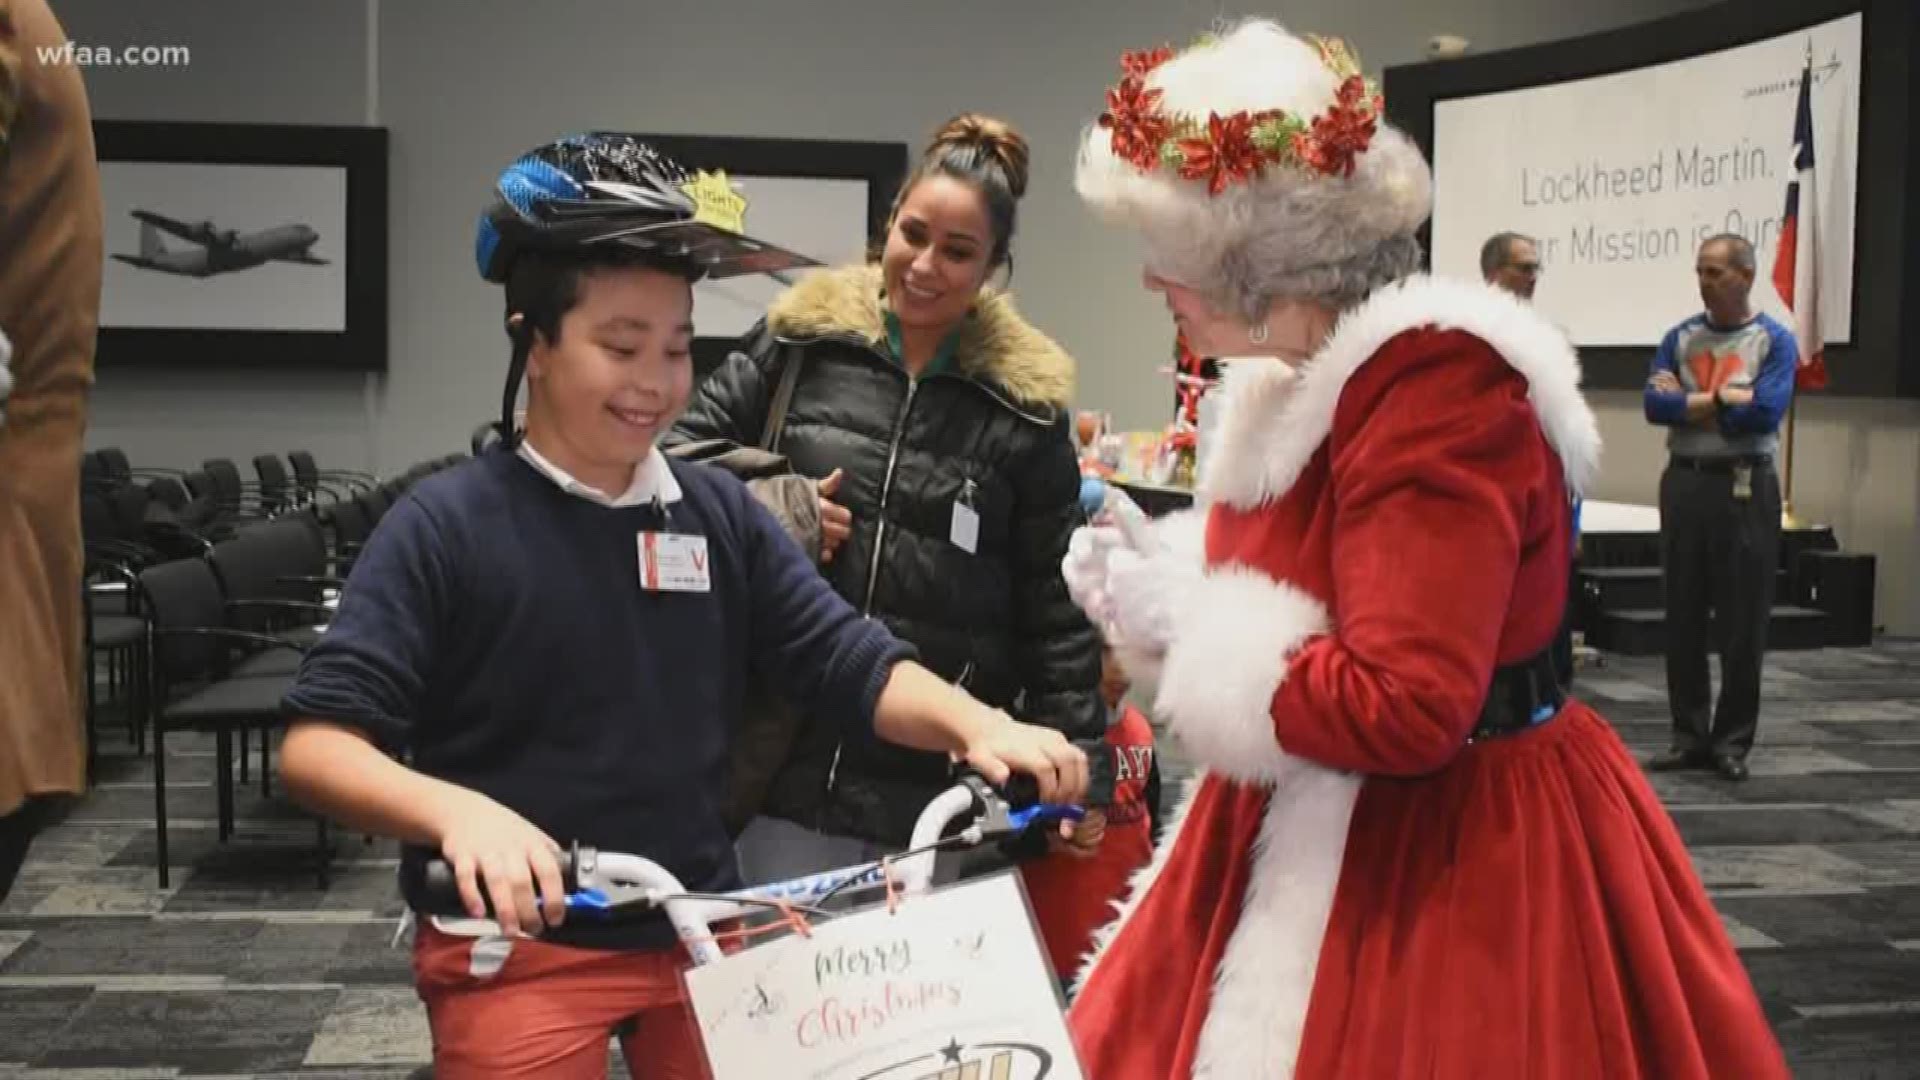 Christmas arrived early for hundreds of kids after Lockheed Martin workers raised more than  $250,000 for area charities.